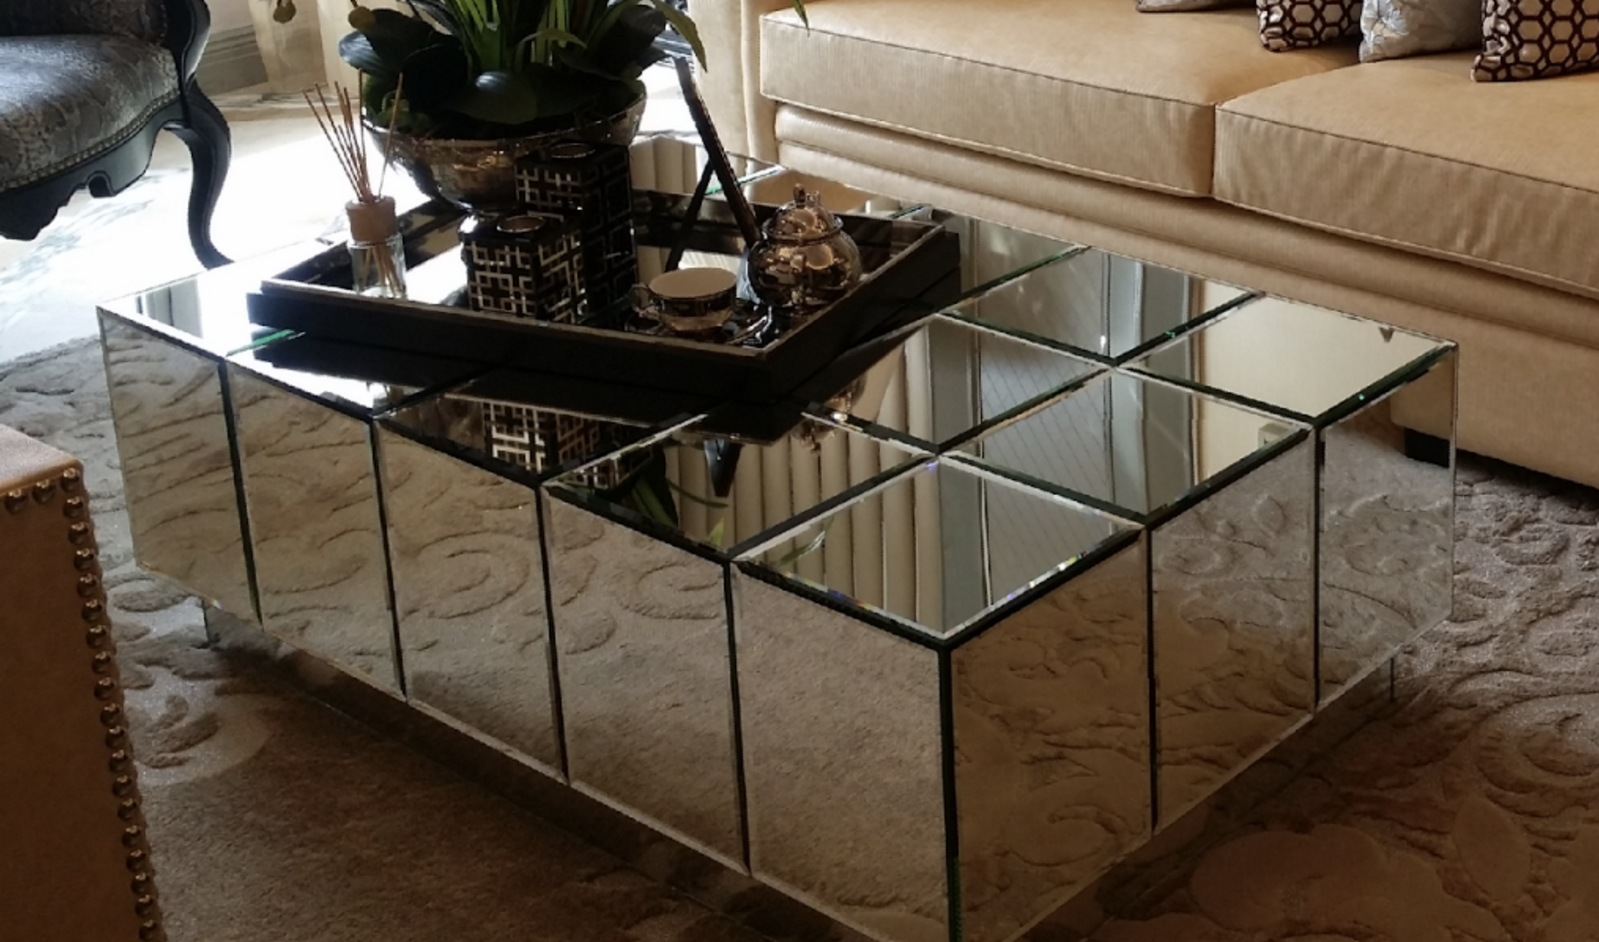 Block Mirrored Coffee Table Brisbane, Coffee Tables Used On The Block